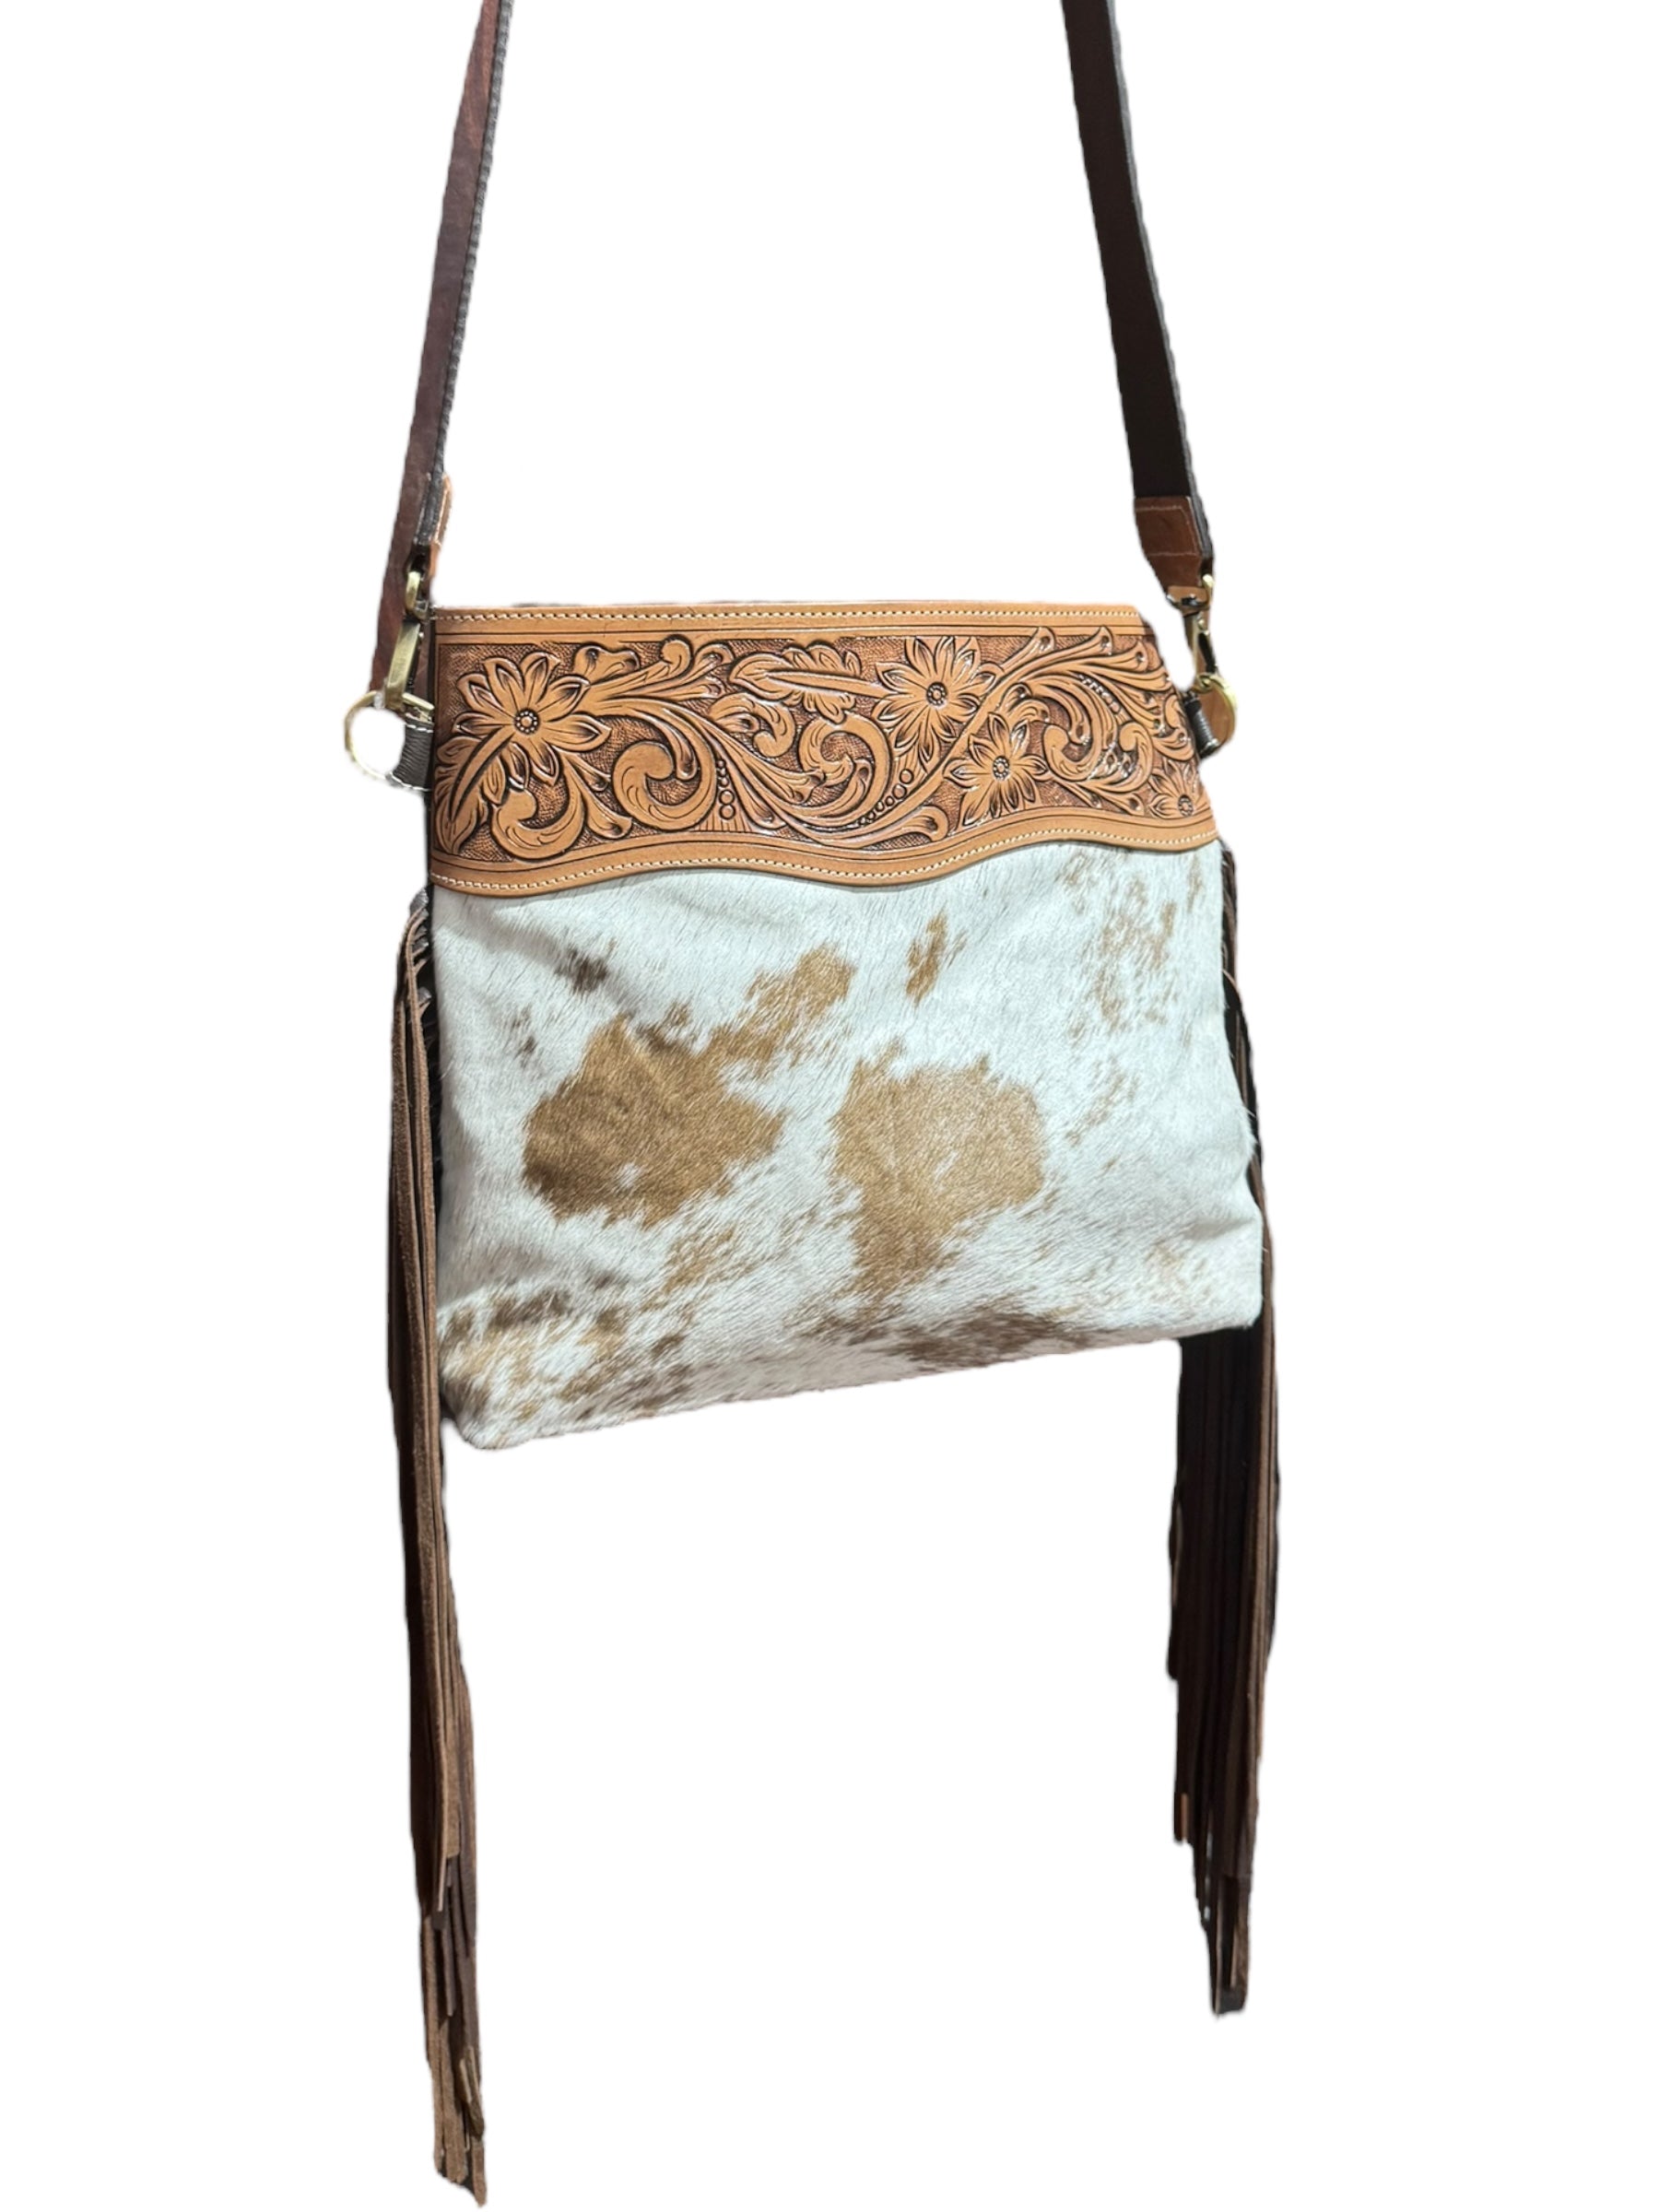 ‘Coolatai' Tooled Leather Cowhide Fringe Sling Bag - Brown